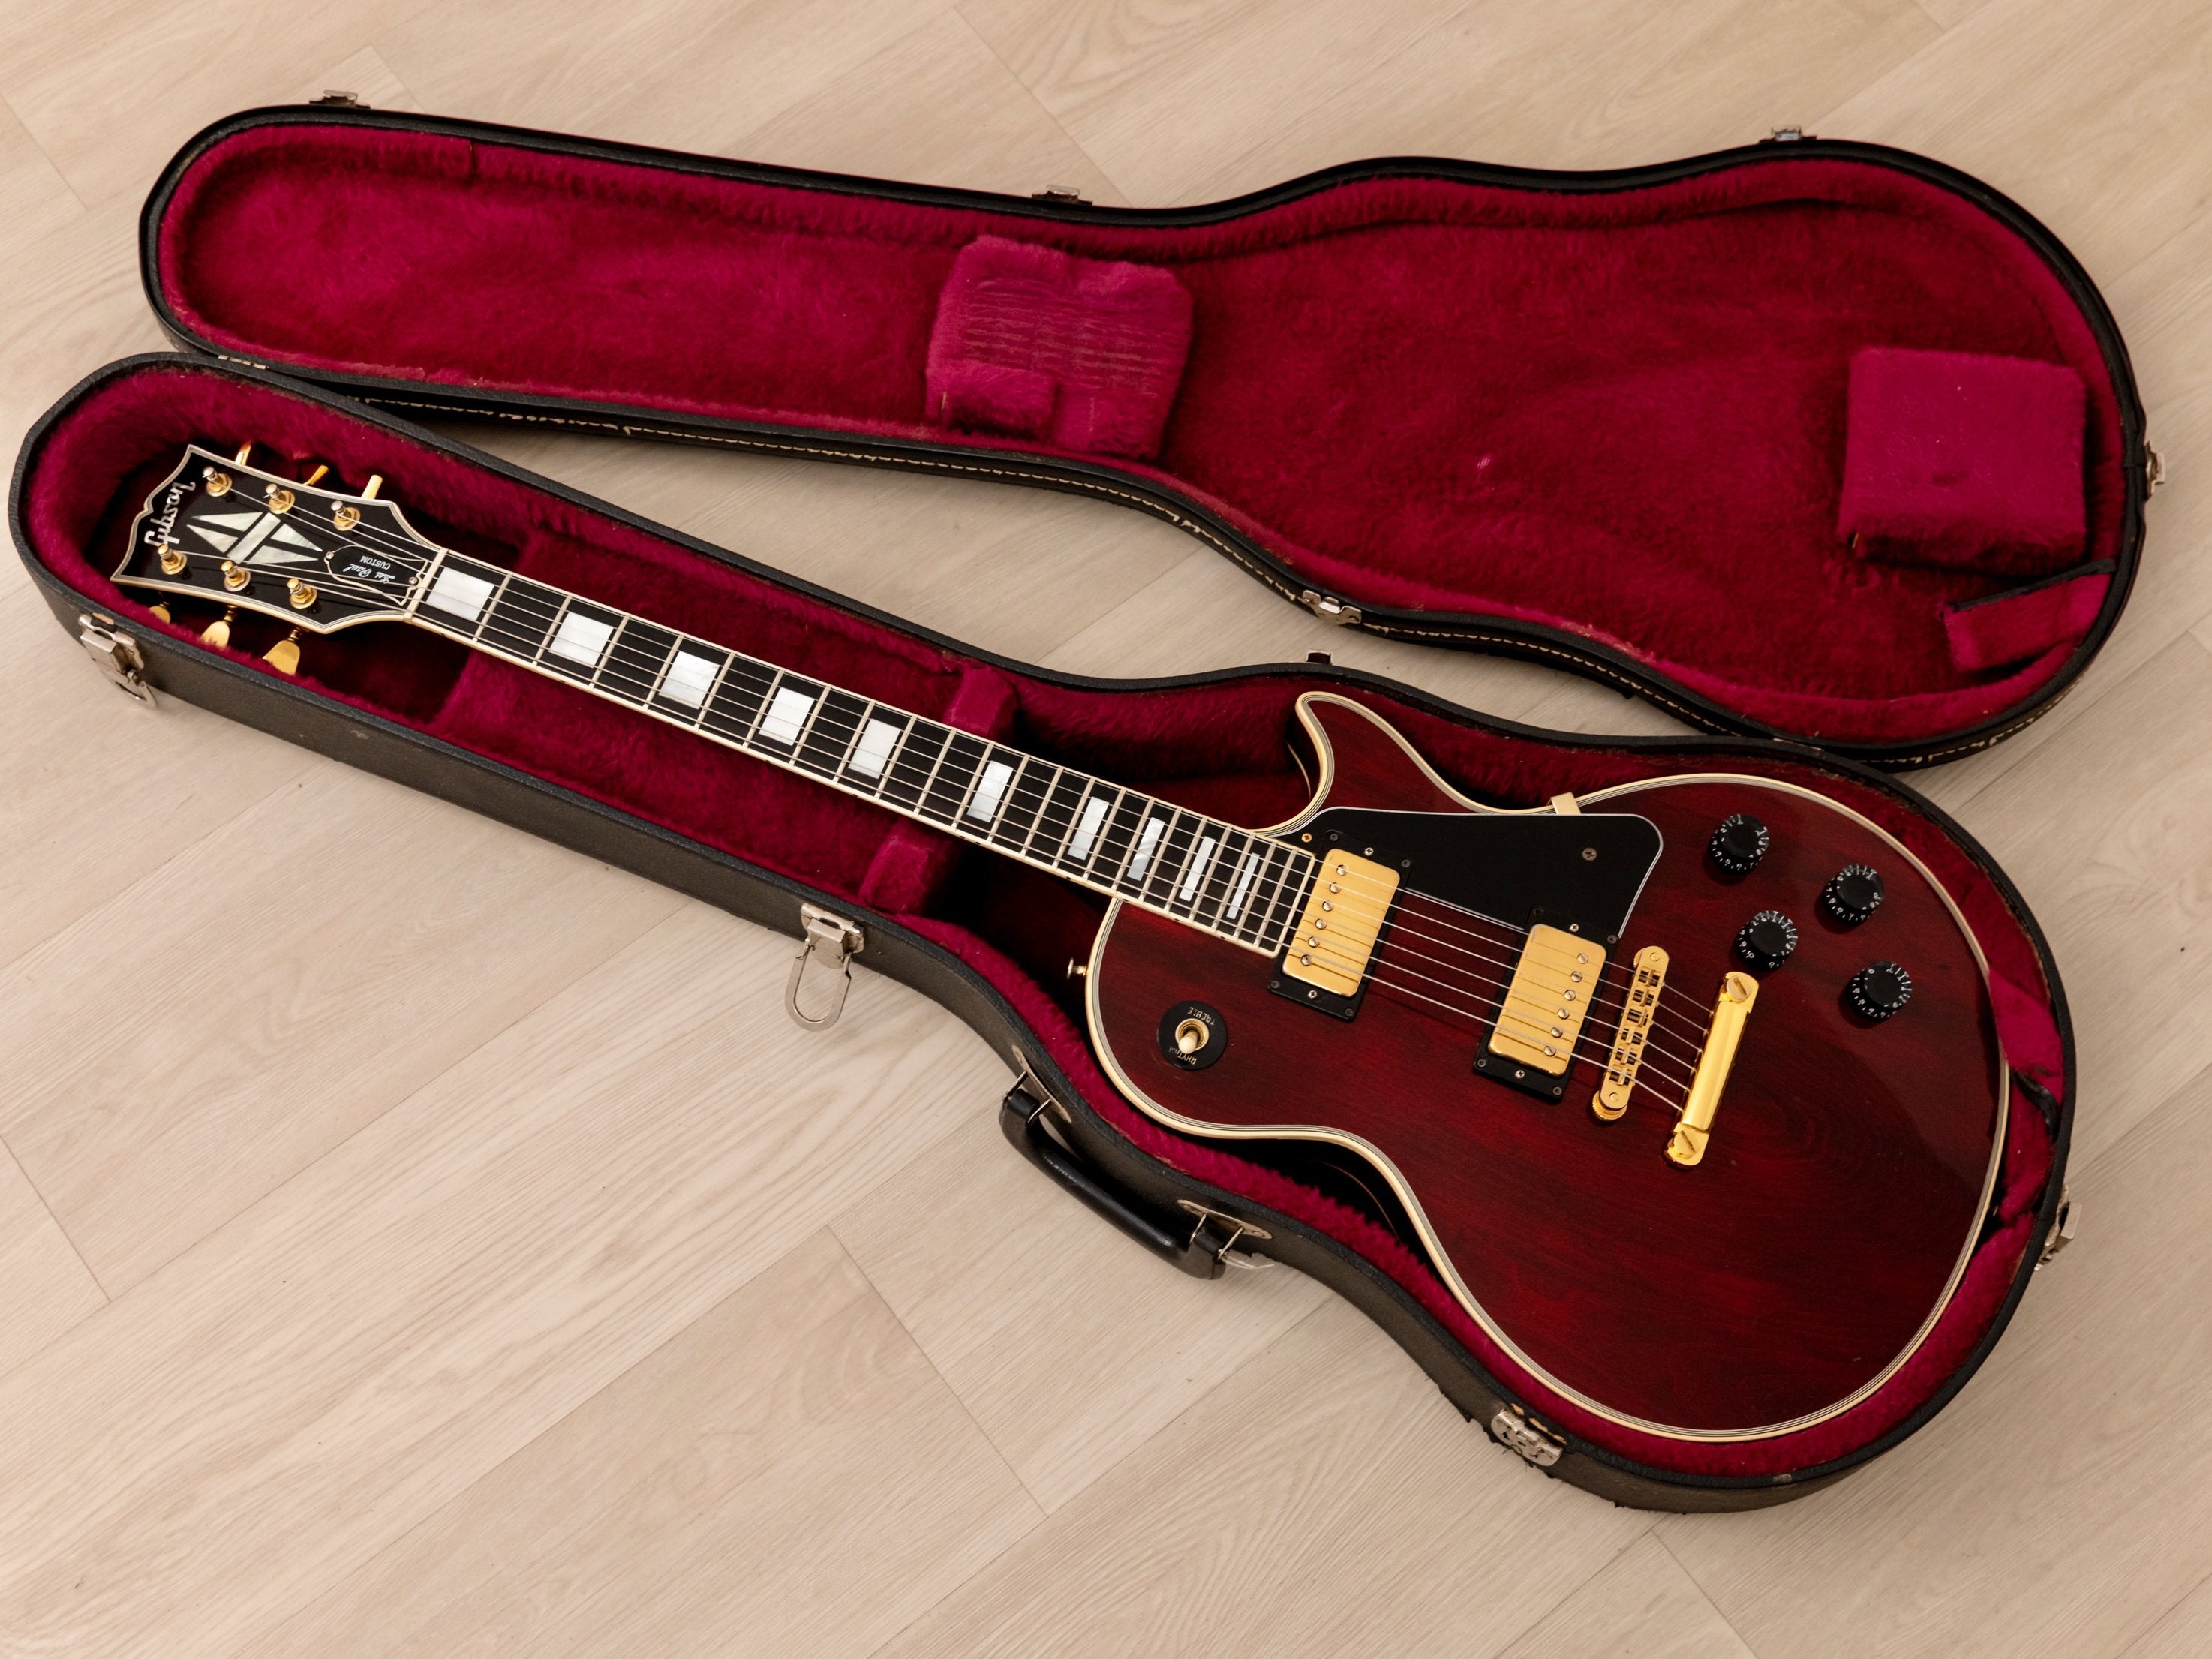 1976 Gibson Les Paul Custom Vintage Electric Guitar Wine Red w/ T Tops, Case